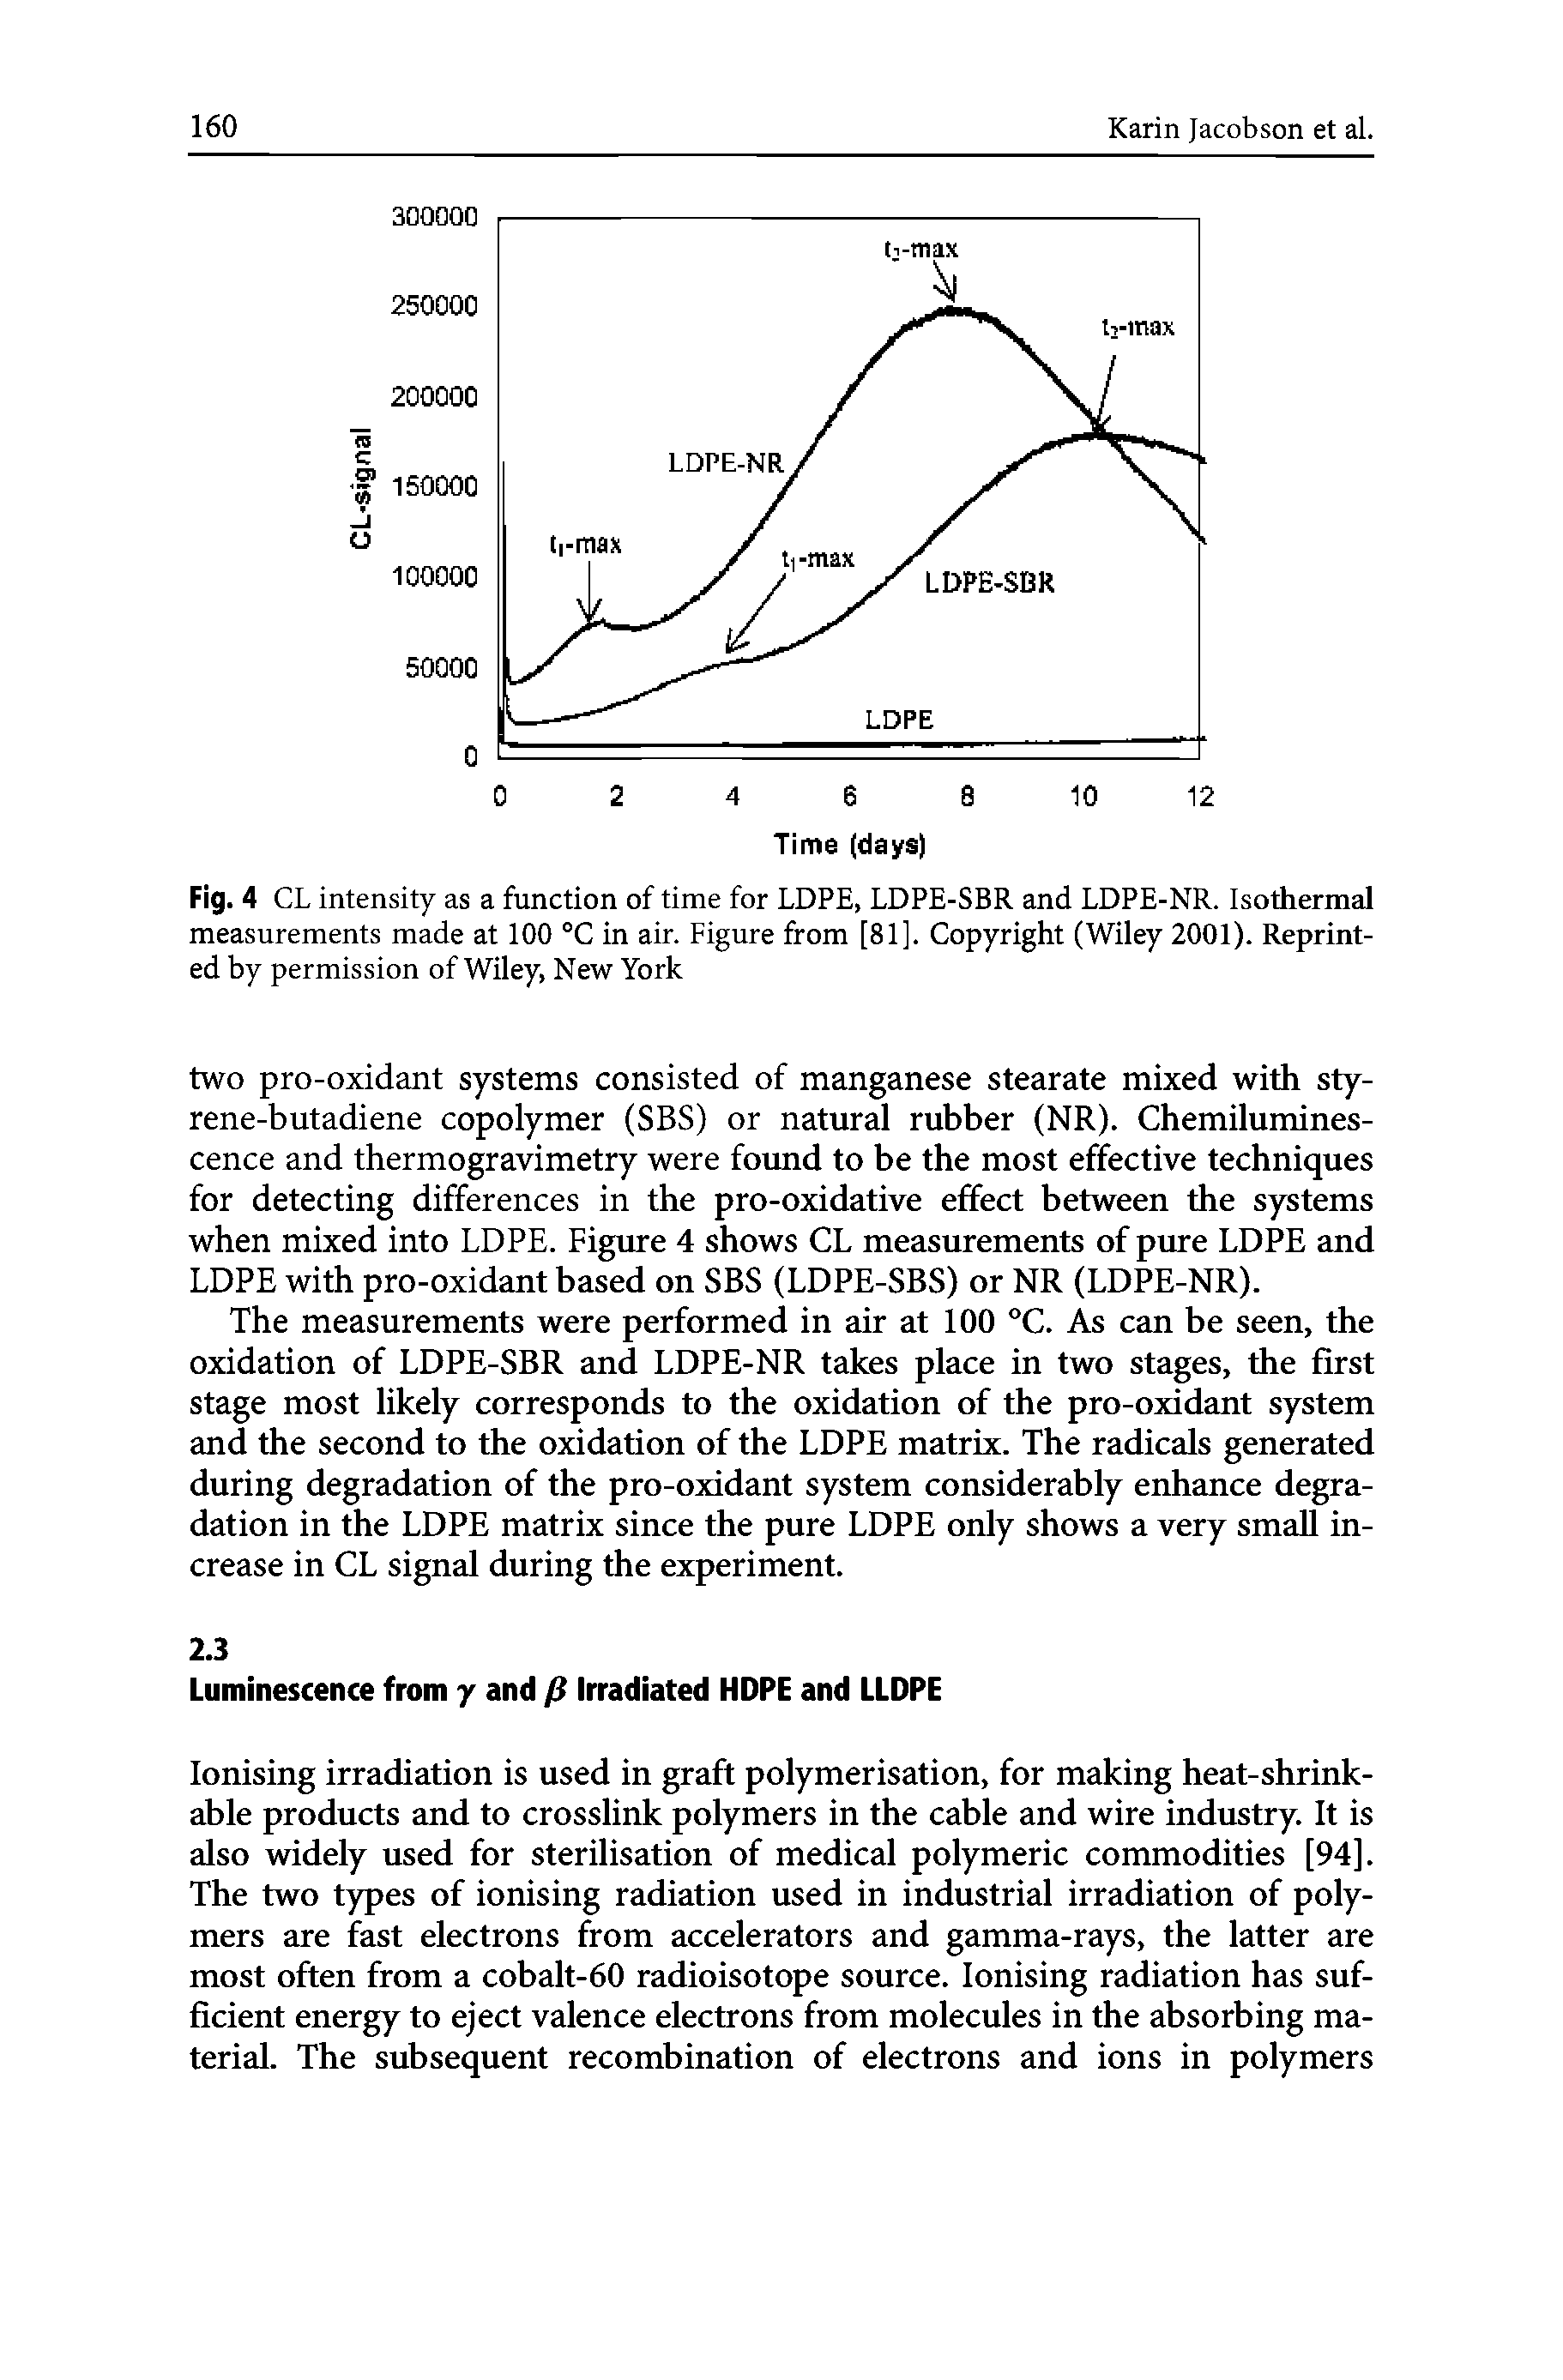 Fig. 4 CL intensity as a function of time for LDPE, LDPE-SBR and LDPE-NR. Isothermal measurements made at 100 °C in air. Figure from [81]. Copyright (Wiley 2001). Reprinted by permission of Wiley, New York...